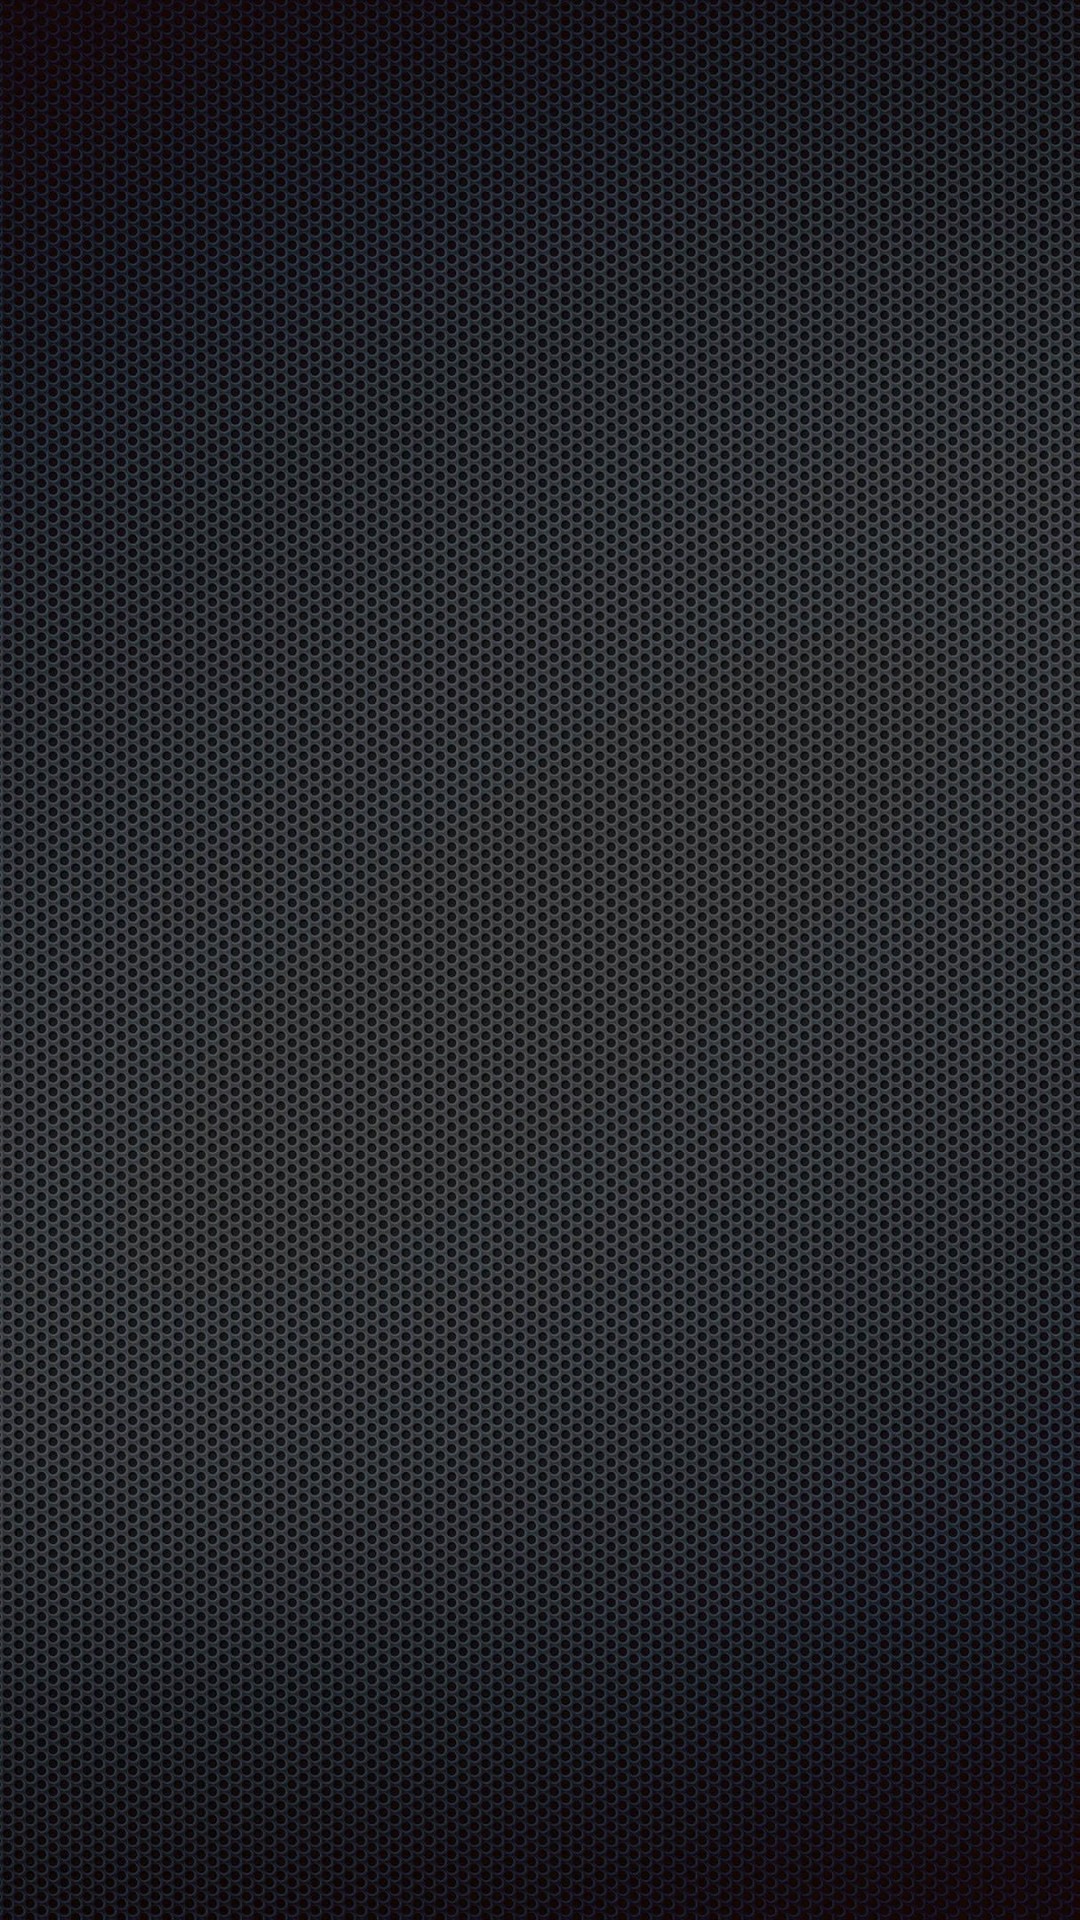 Black Grill Texture Wallpaper for HTC One